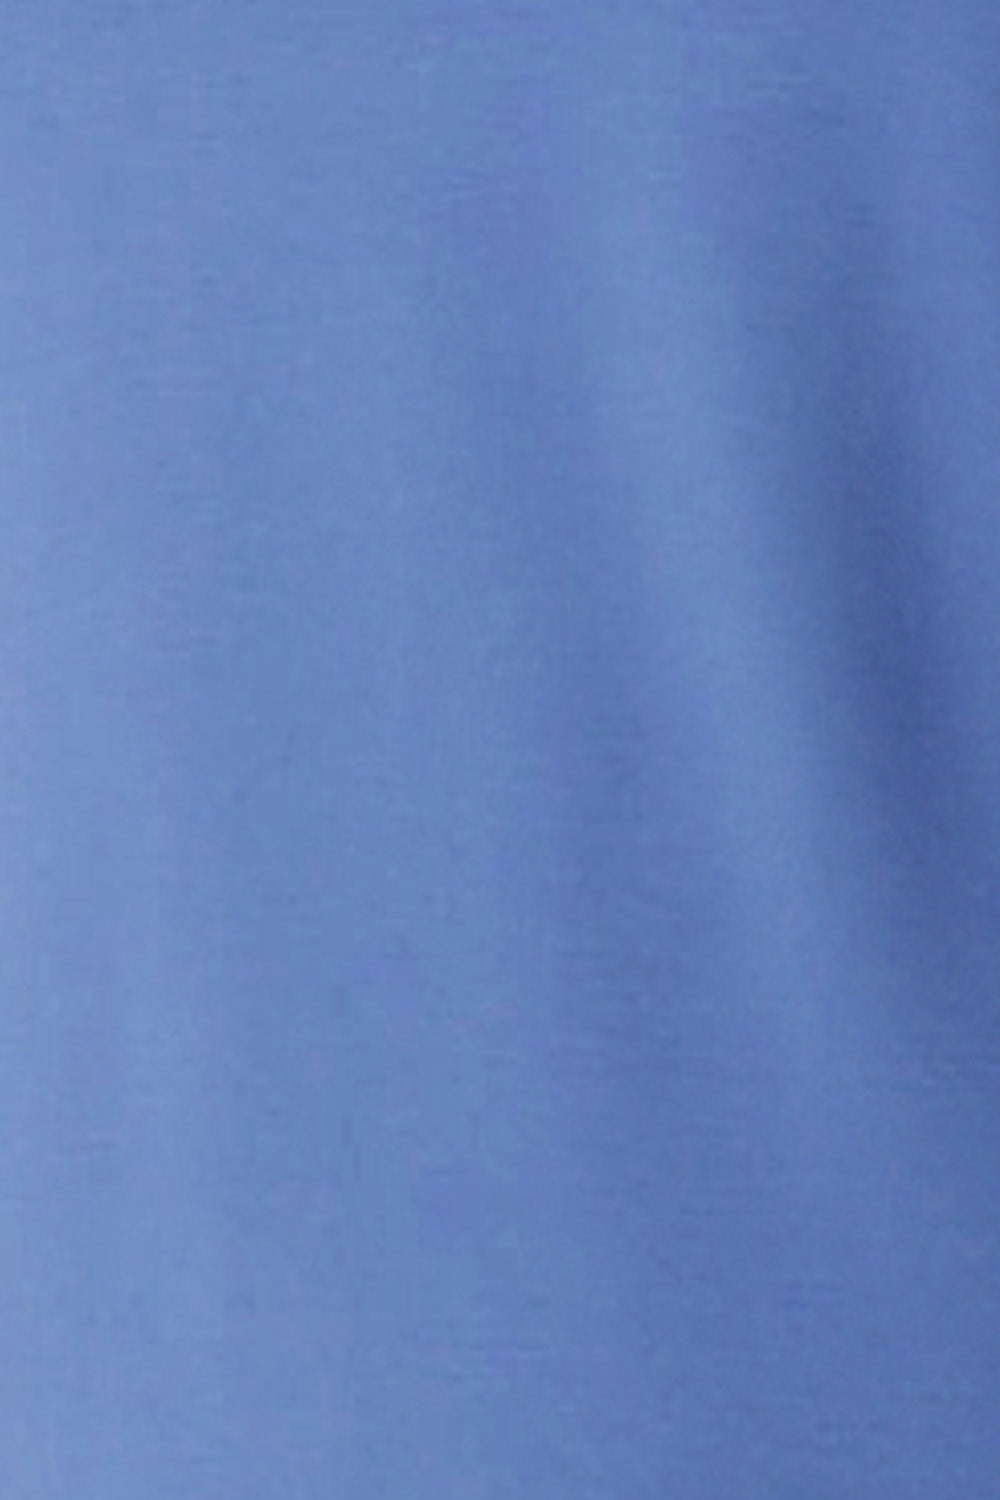 swatch of periwinkle blue bamboo jersey, a sustainable, natural fibre used by Australian-made women's clothing brand Leina and Fleur to make a range of causal women's bamboo jersey tops.